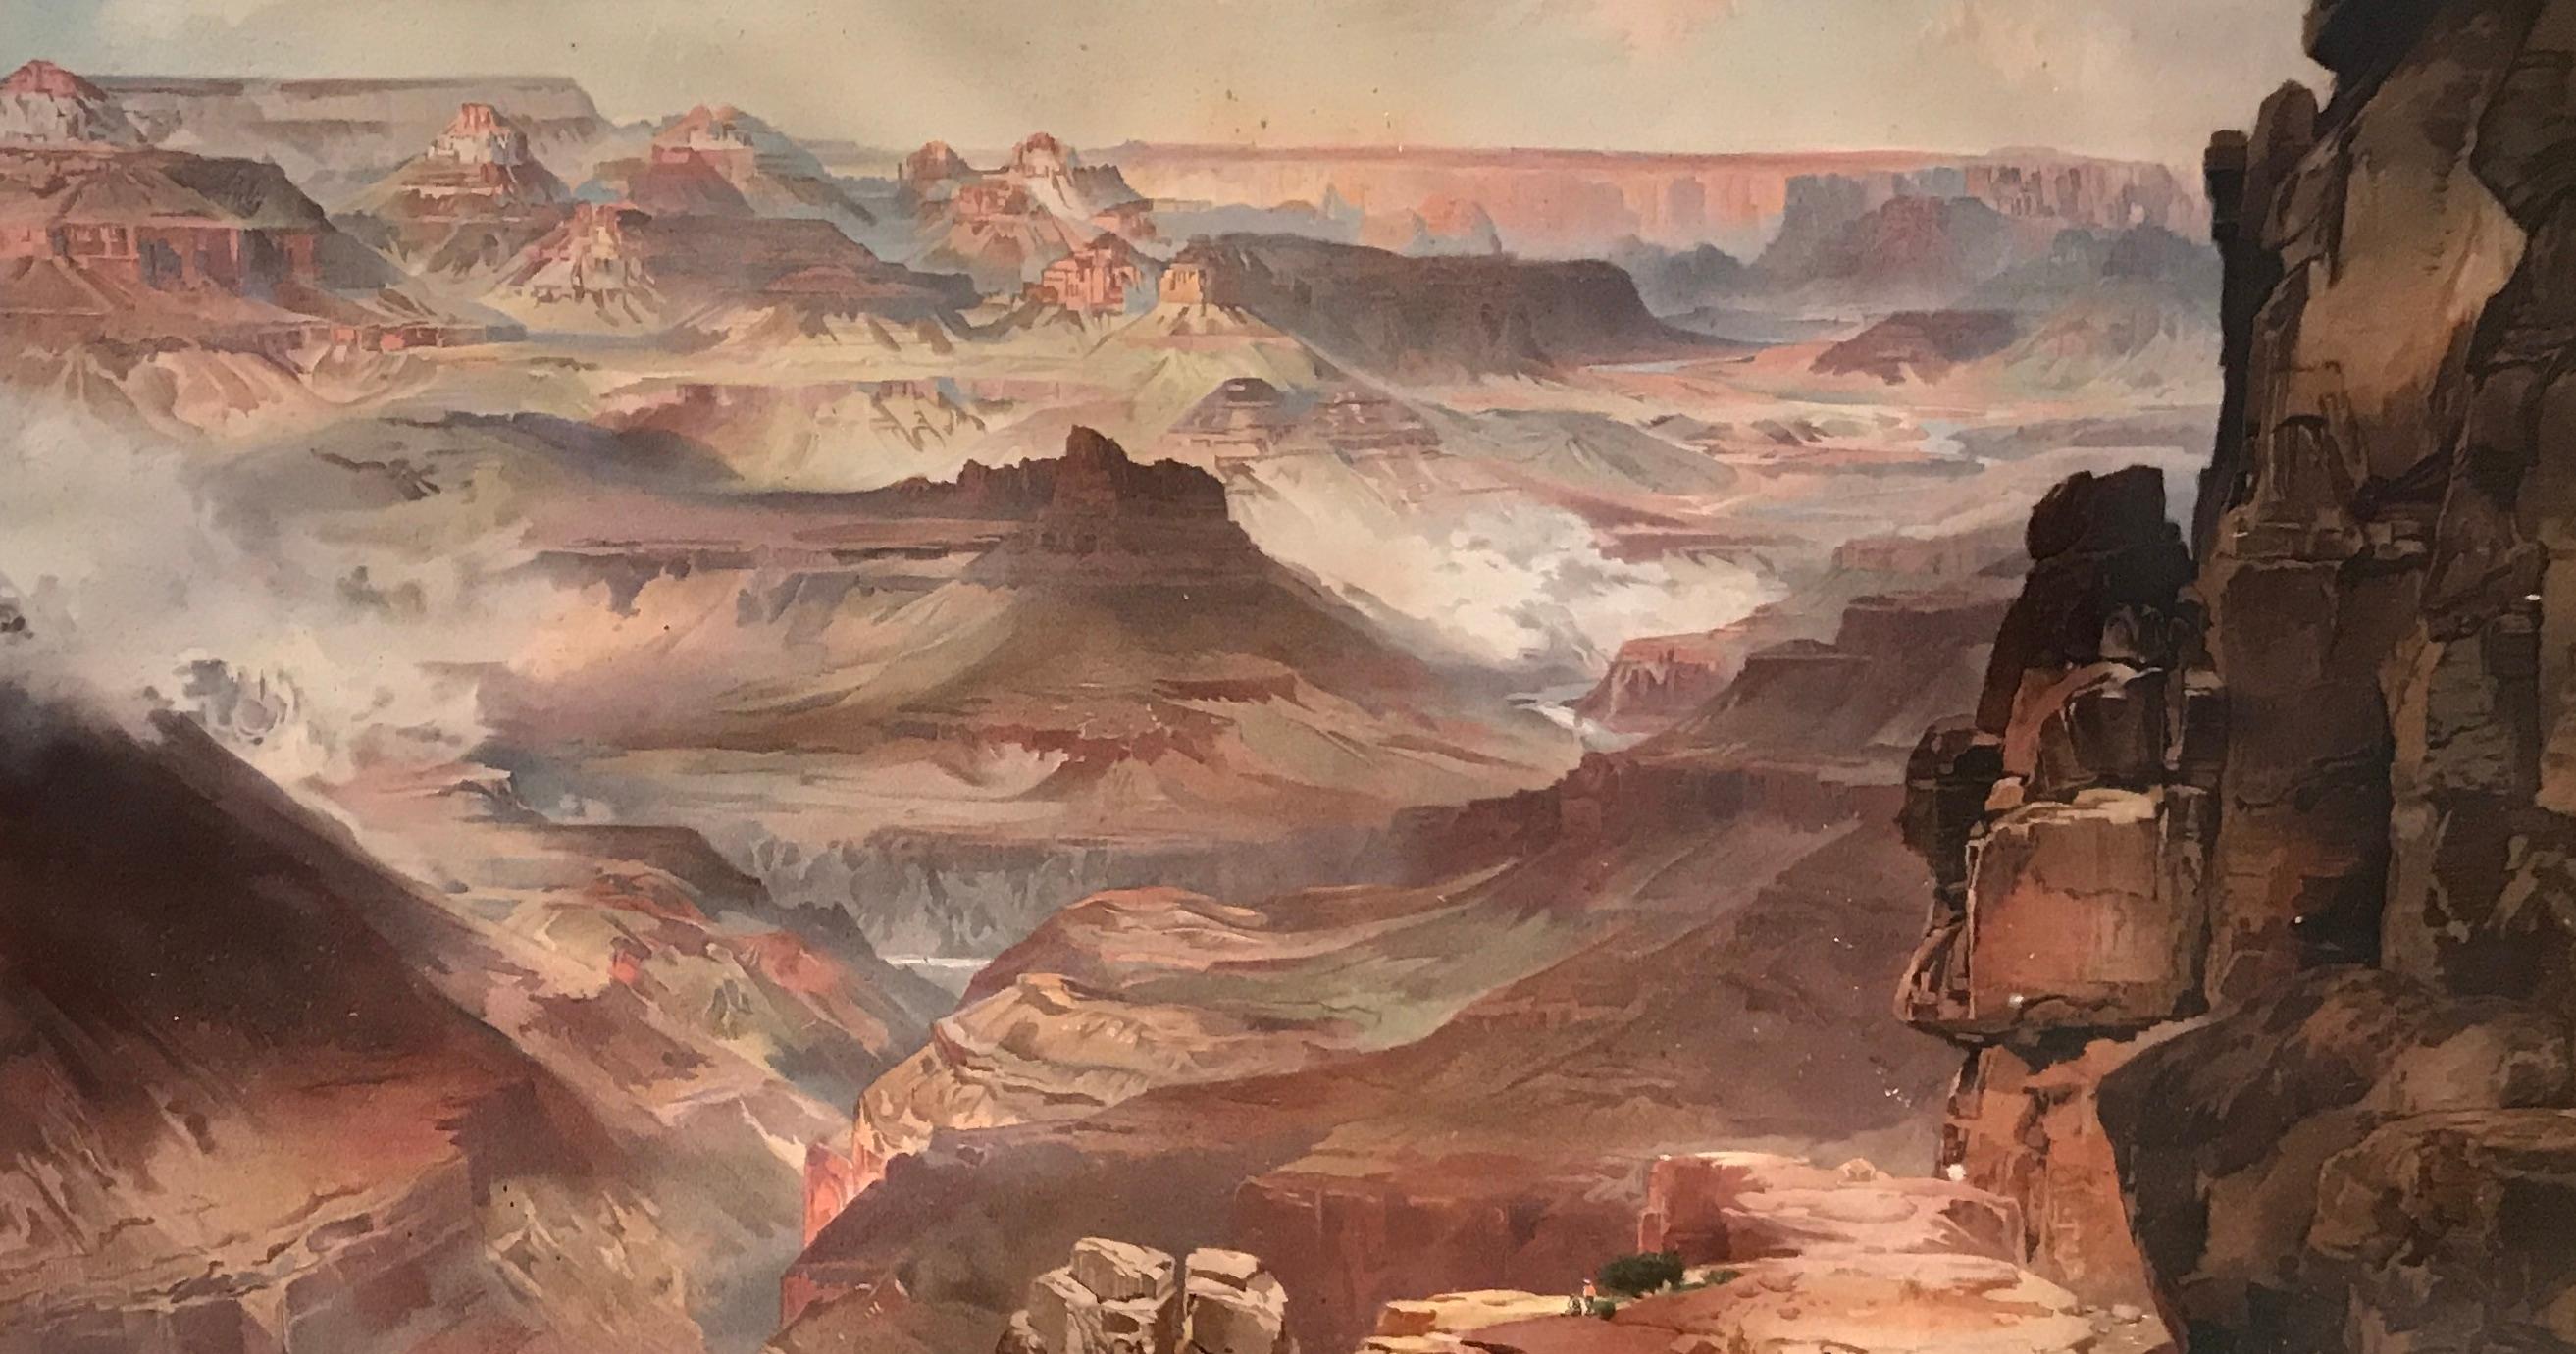 Created by Gustav Buek from an original oil painting made in 1892 by Thomas Moran. The painting is today owned by the Philadelphia Museum of Art in Philadelphia, Pennsylvania. Both works are entitled The Grand Canyon of the Colorado (the subject is